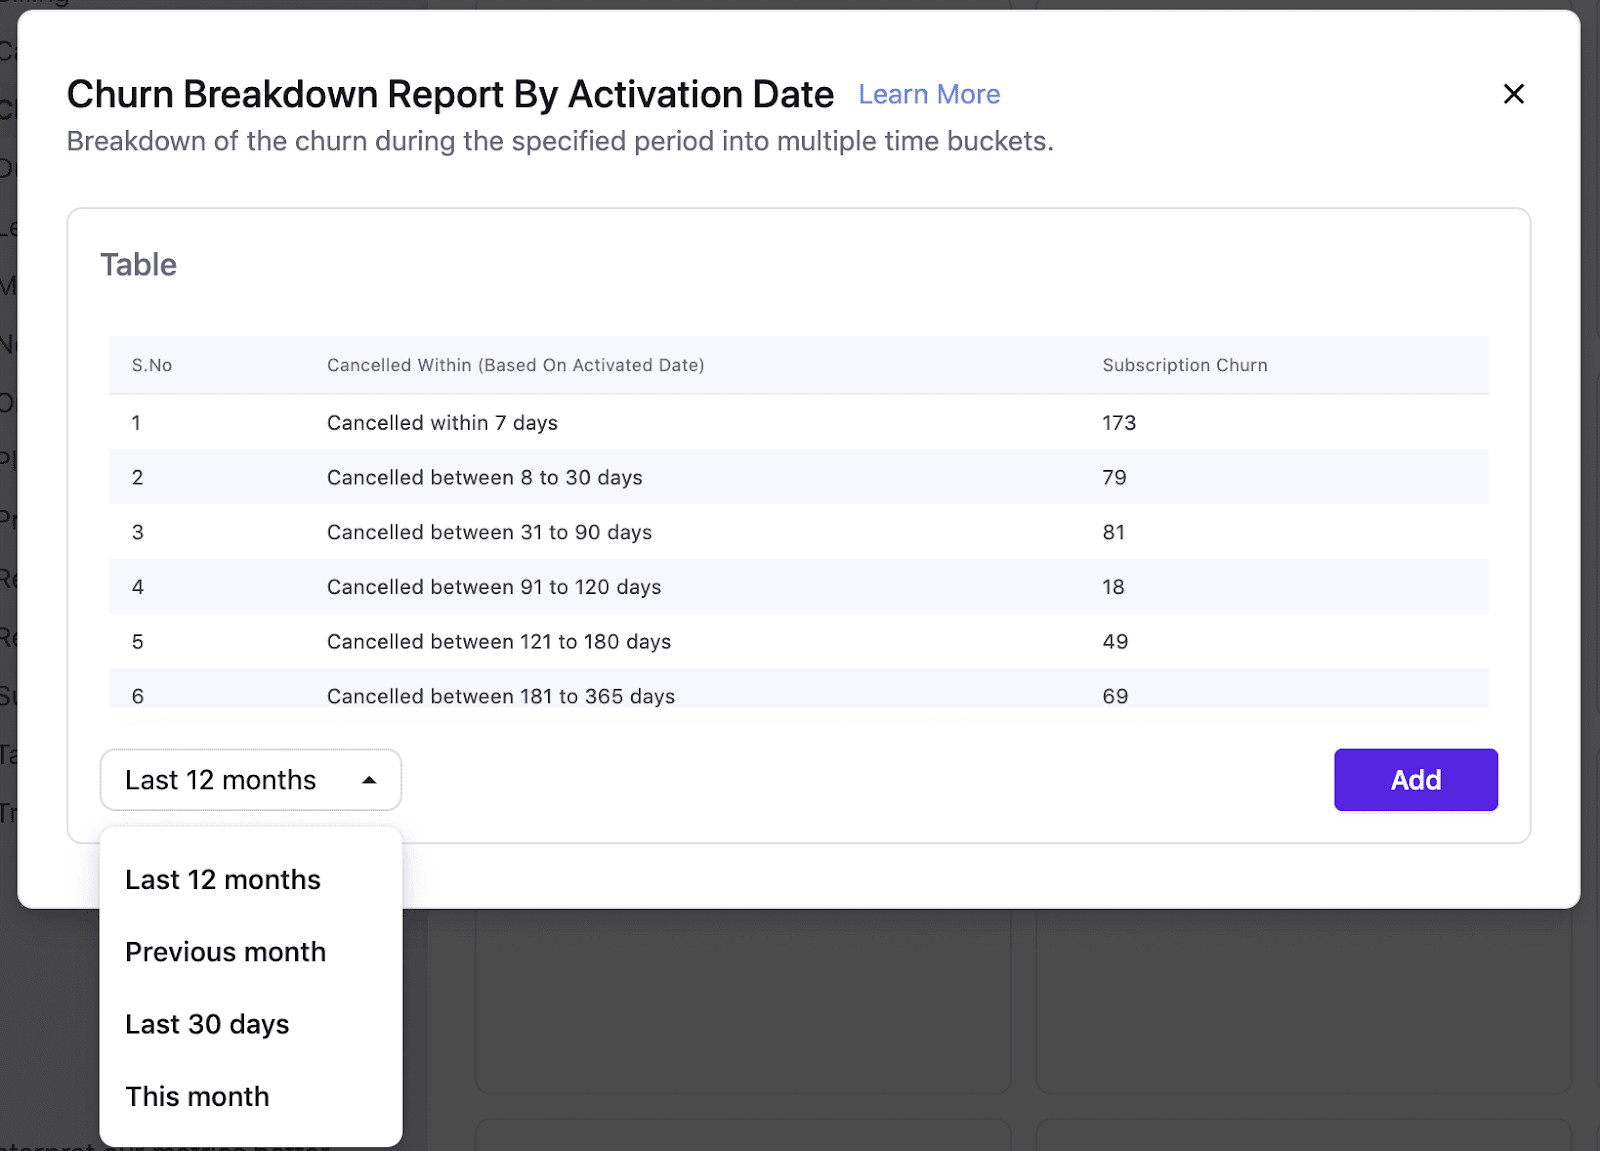 Churn Breakdown Report by Activation Date